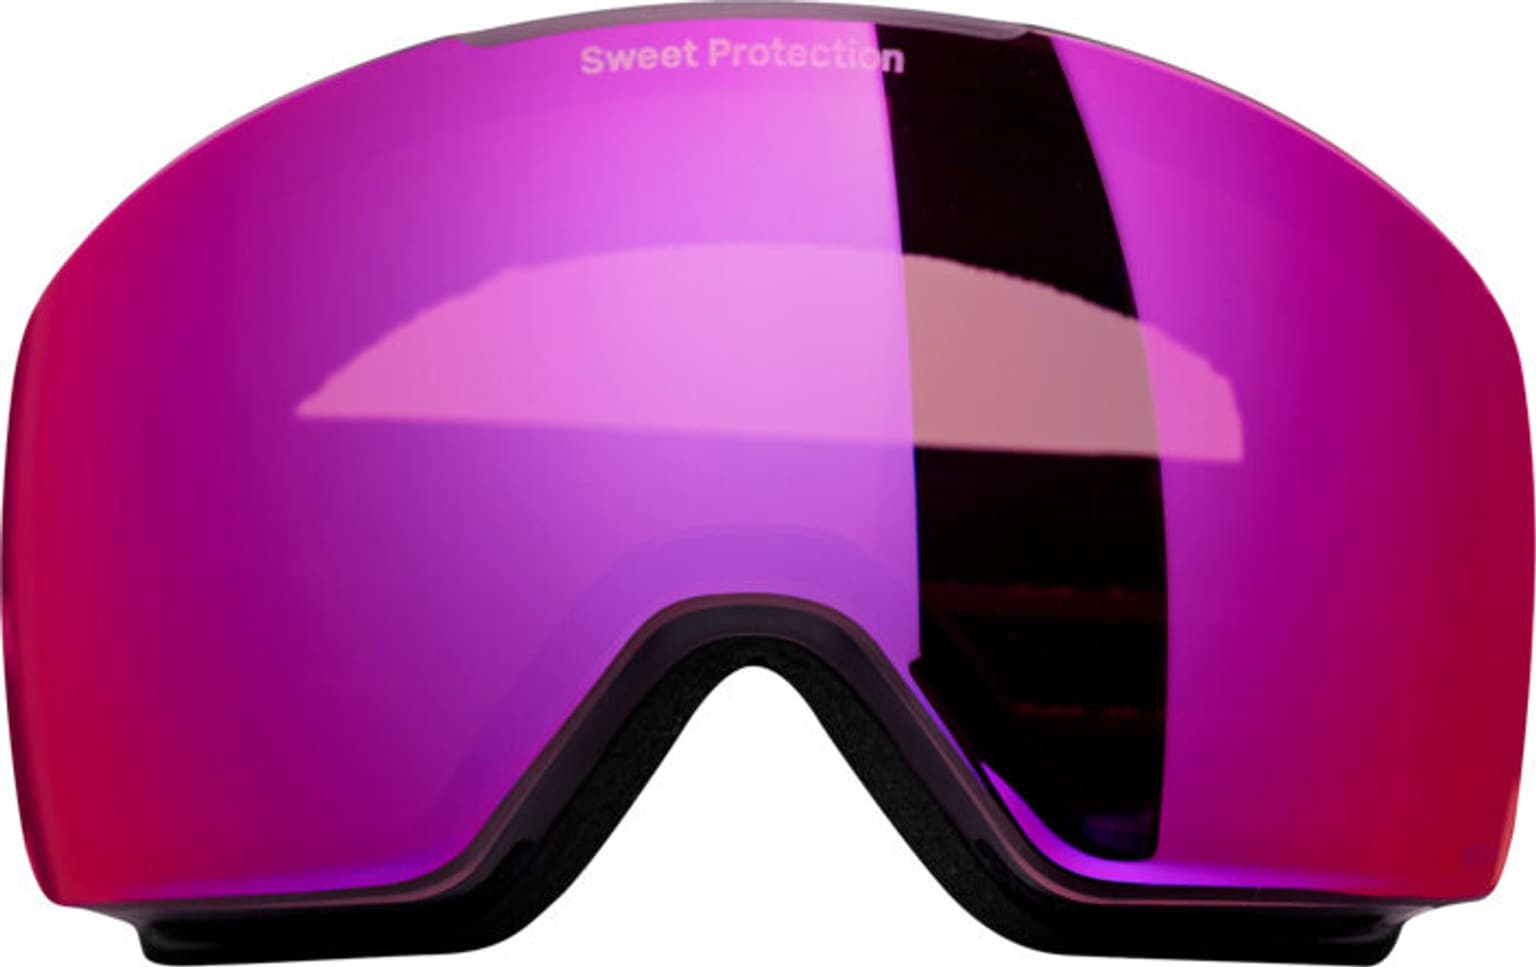 Sweet Protection Sweet Protection Connor RIG Reflect Masque de ski noir 2